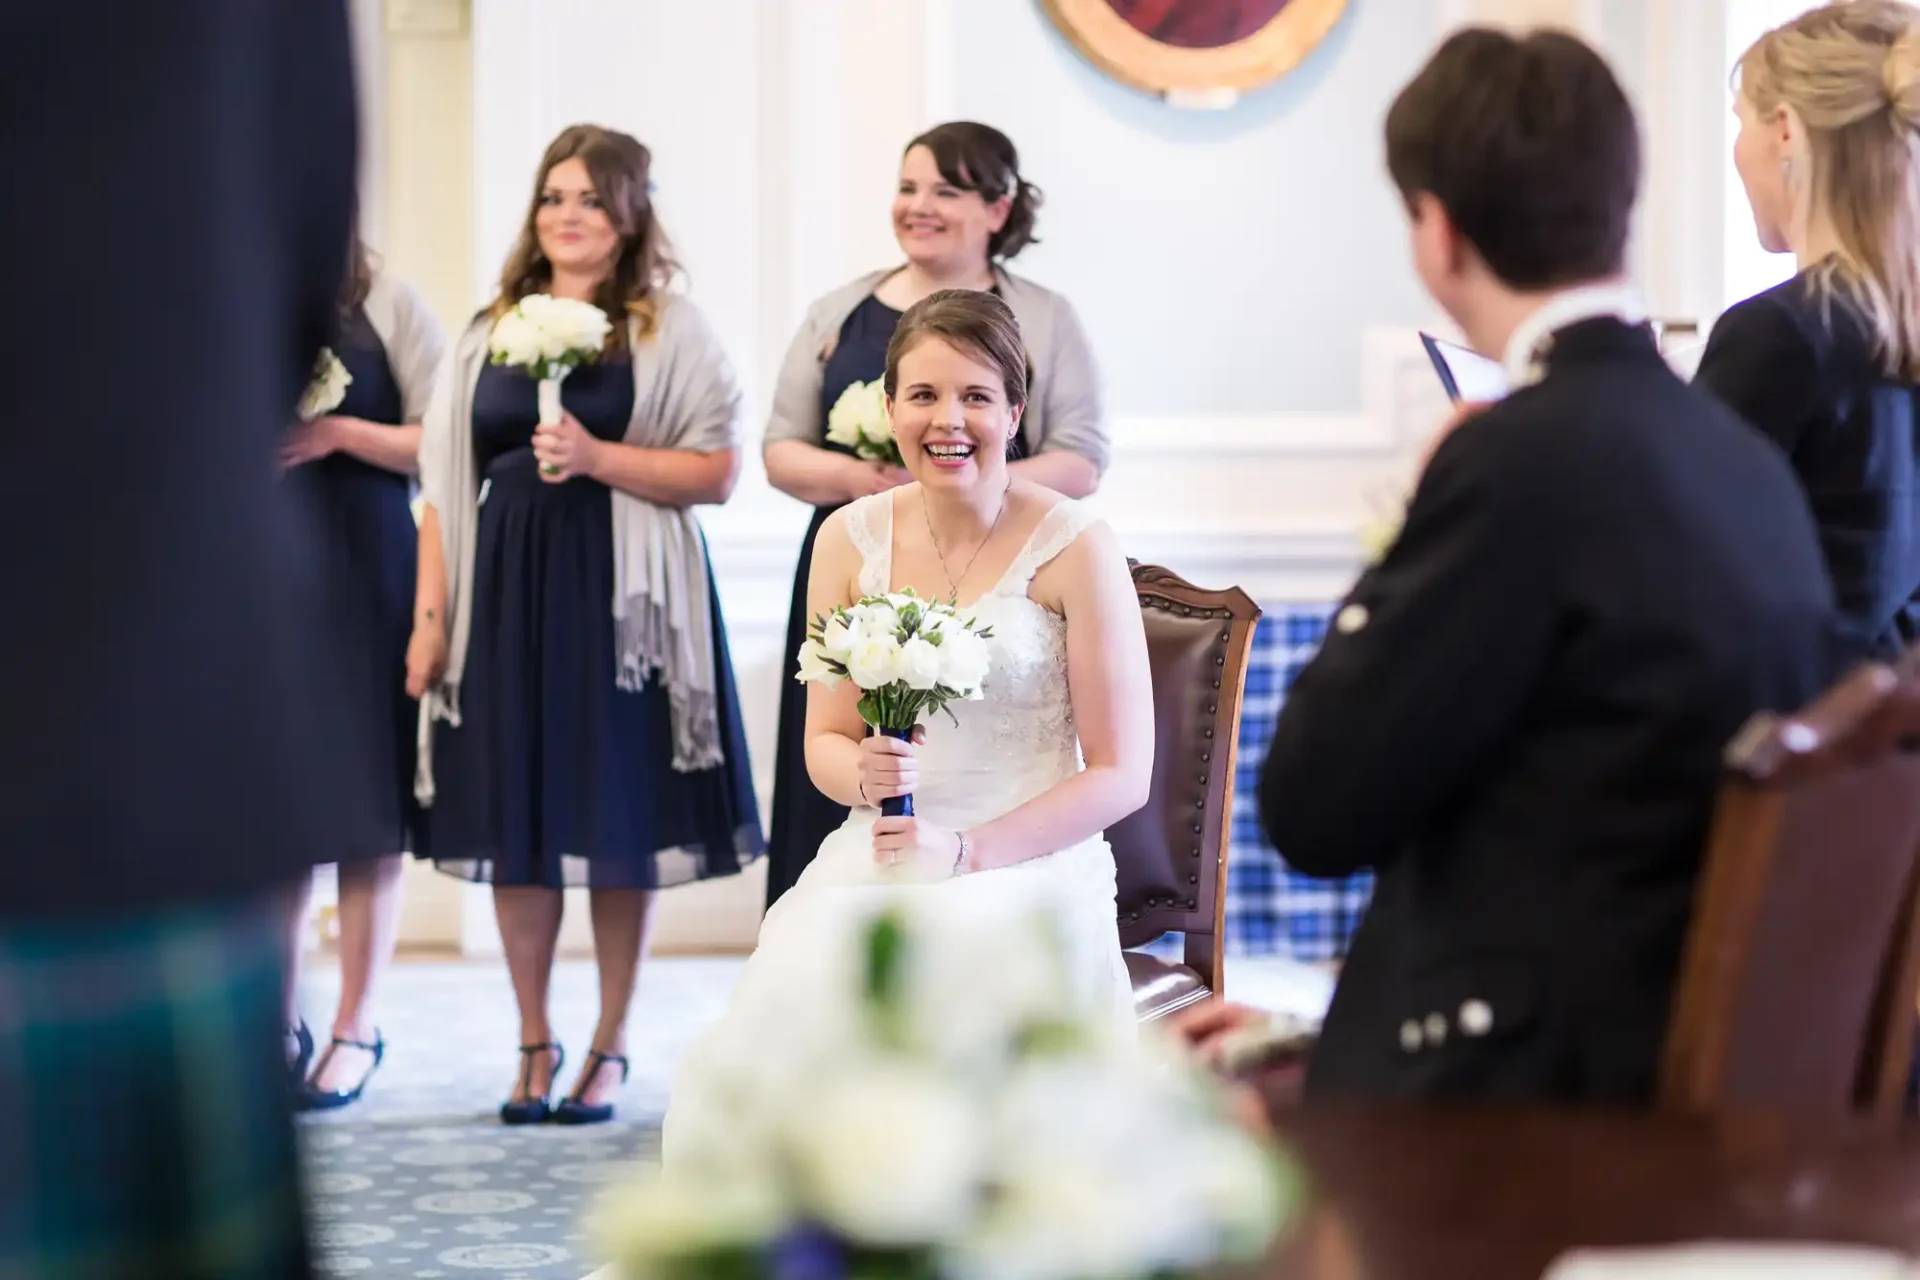 A bride in a white dress holding a bouquet smiles while seated, surrounded by bridesmaids and guests in a ceremonial room.